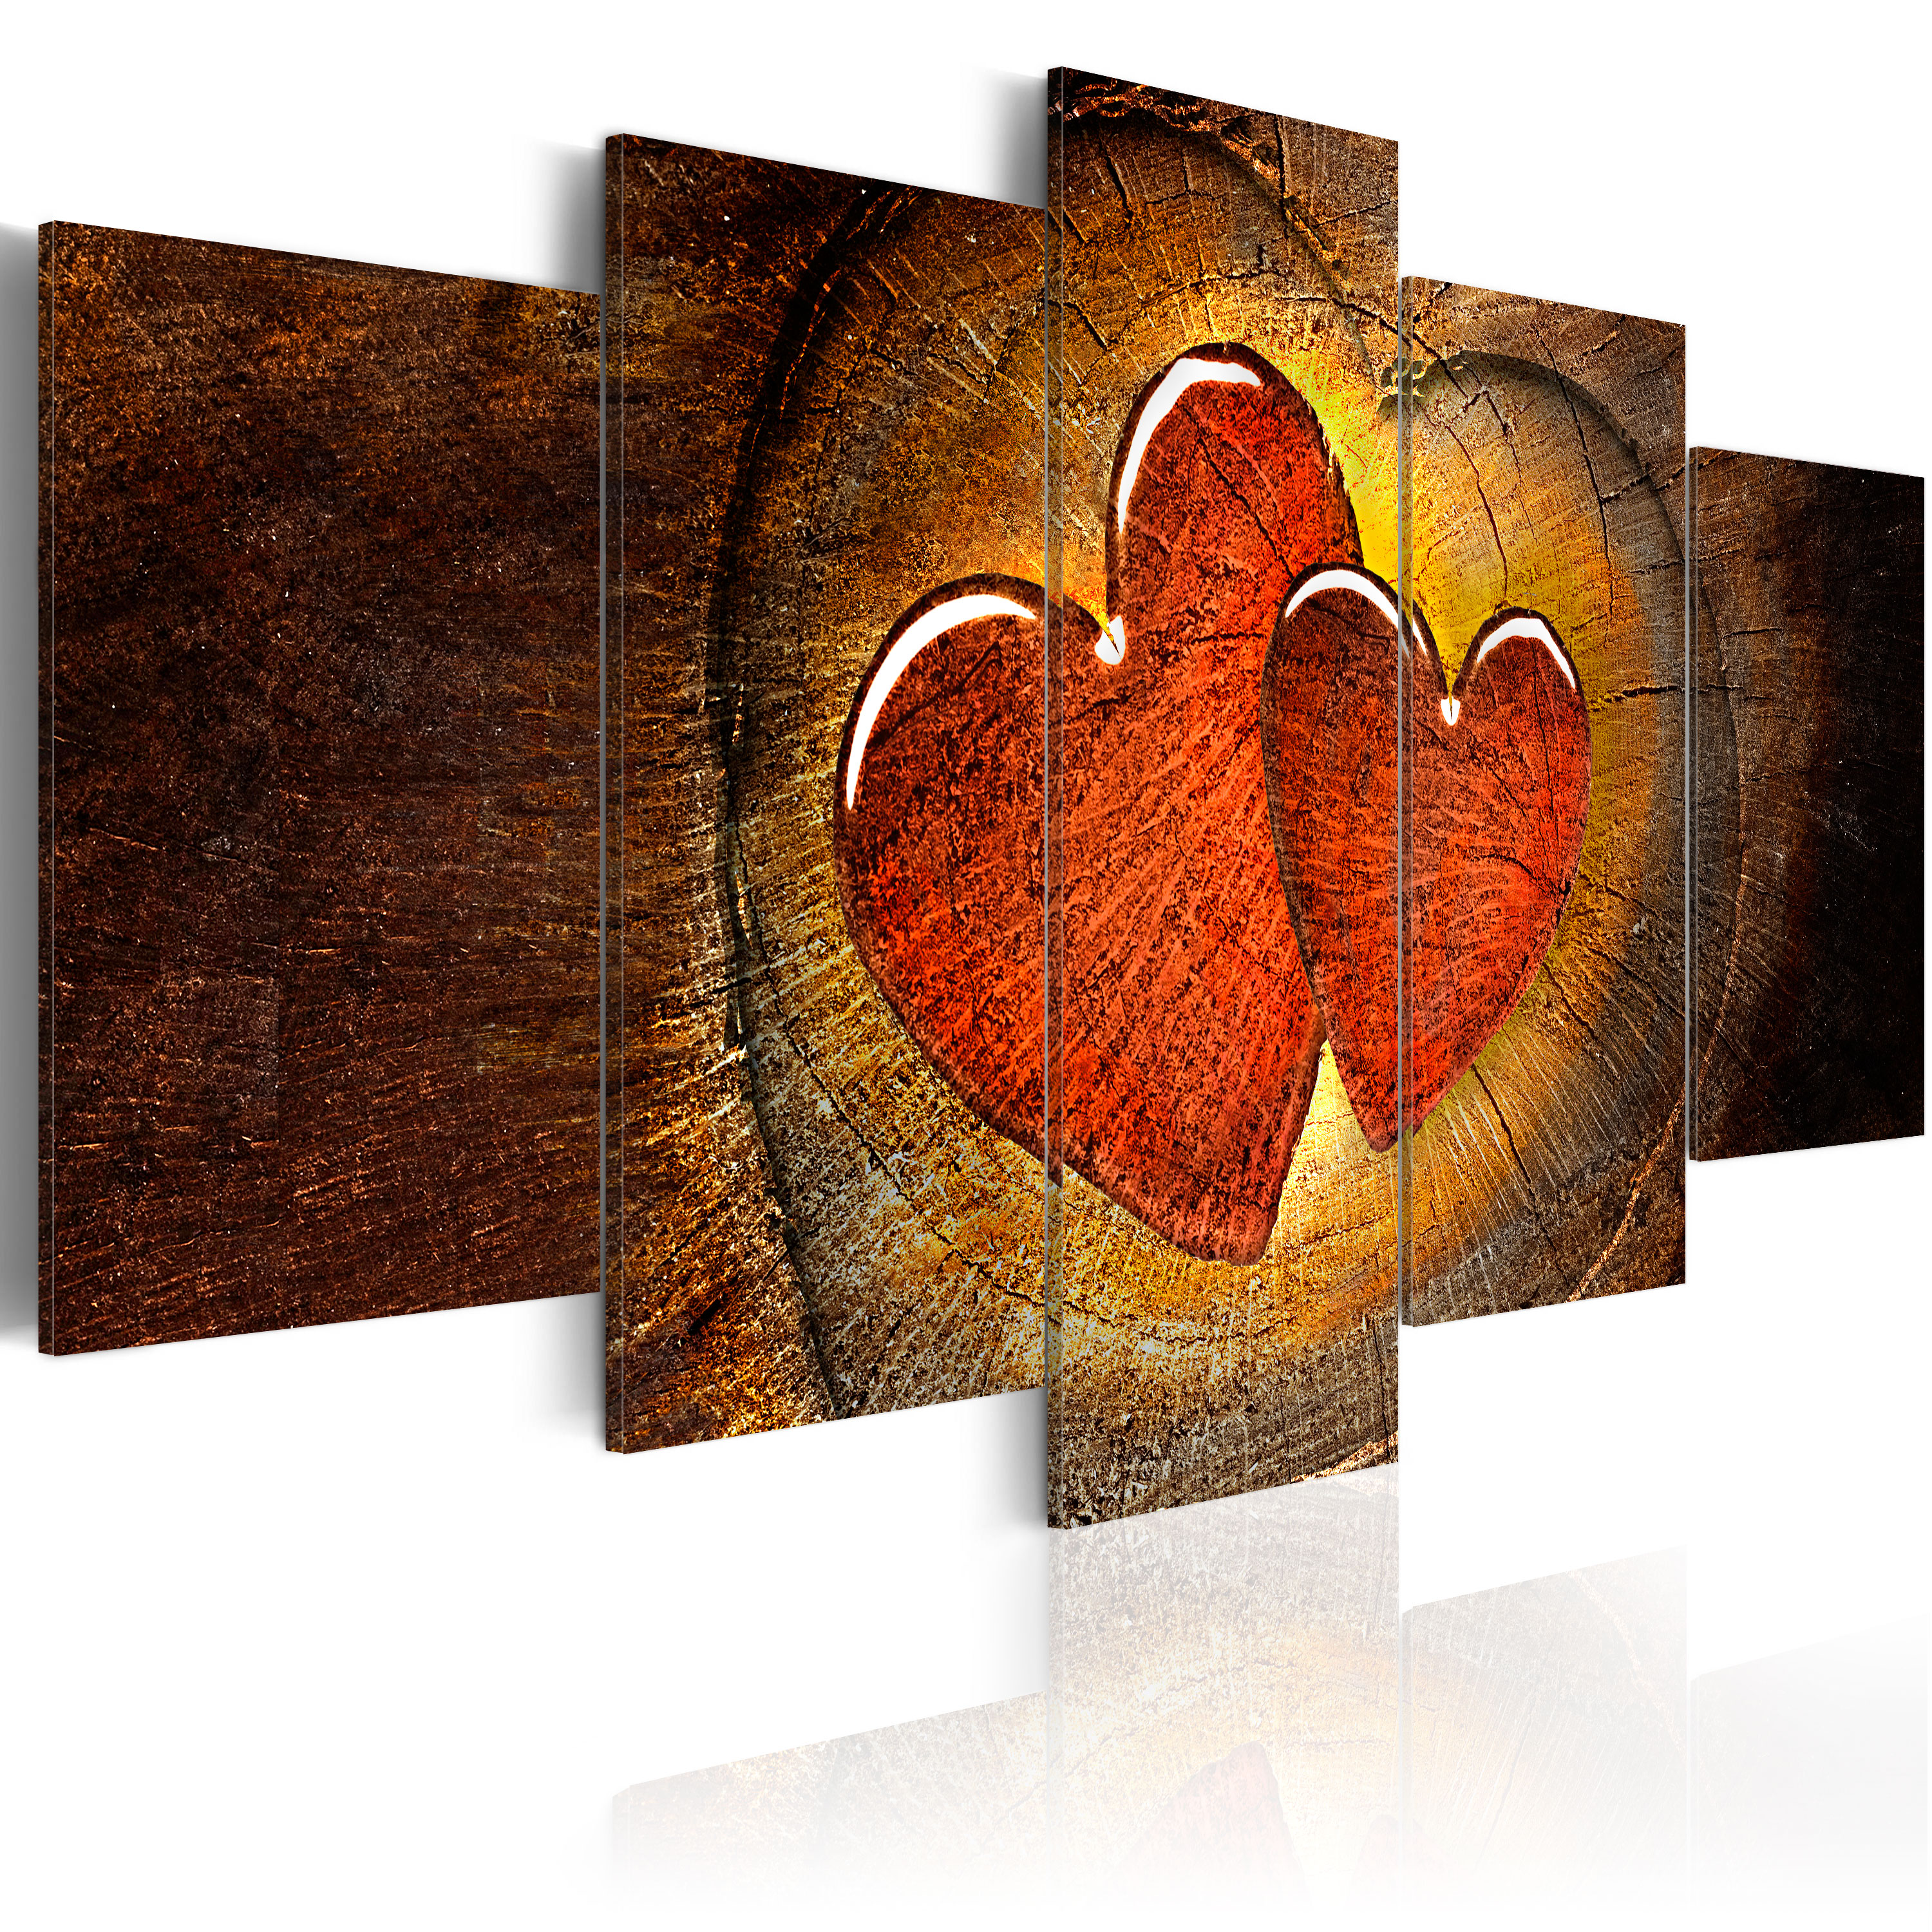 Canvas Print - Beating of your heart - 100x50